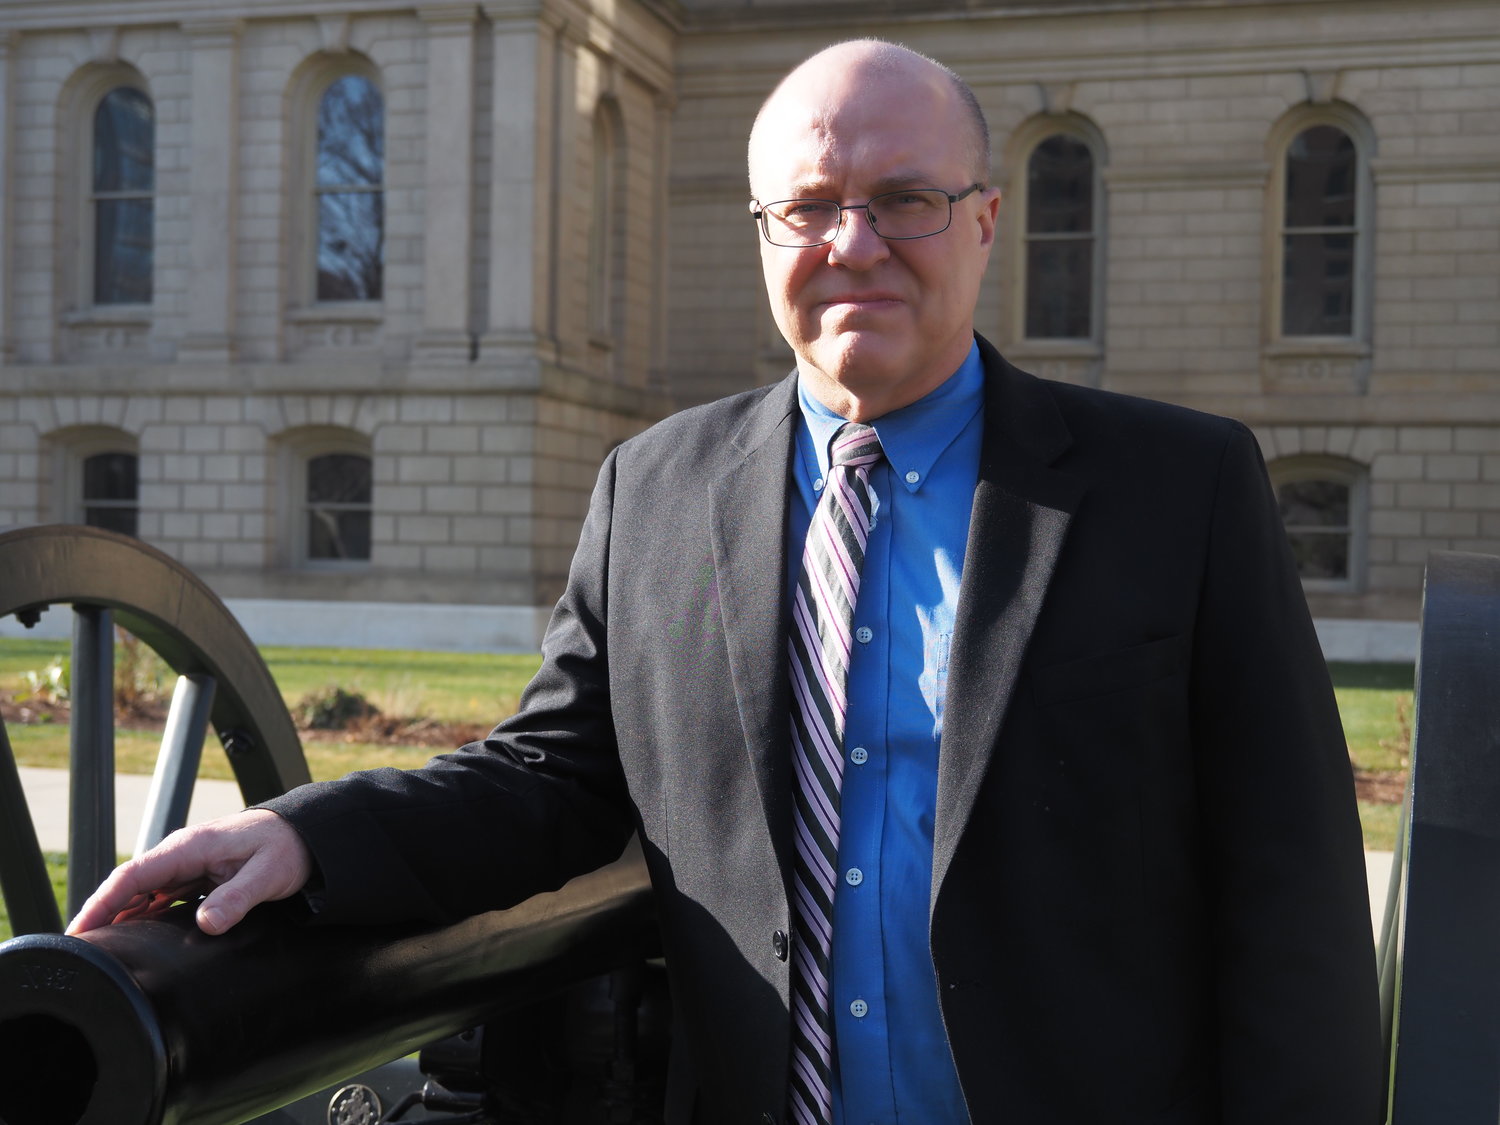 Matthew J. VanAcker, the Michigan Capitol’s education director and co-chair of its Save the Flags project, published “Lansing and the Civil War” to bring attention to the city’s largely overlooked but important role in the conflict.